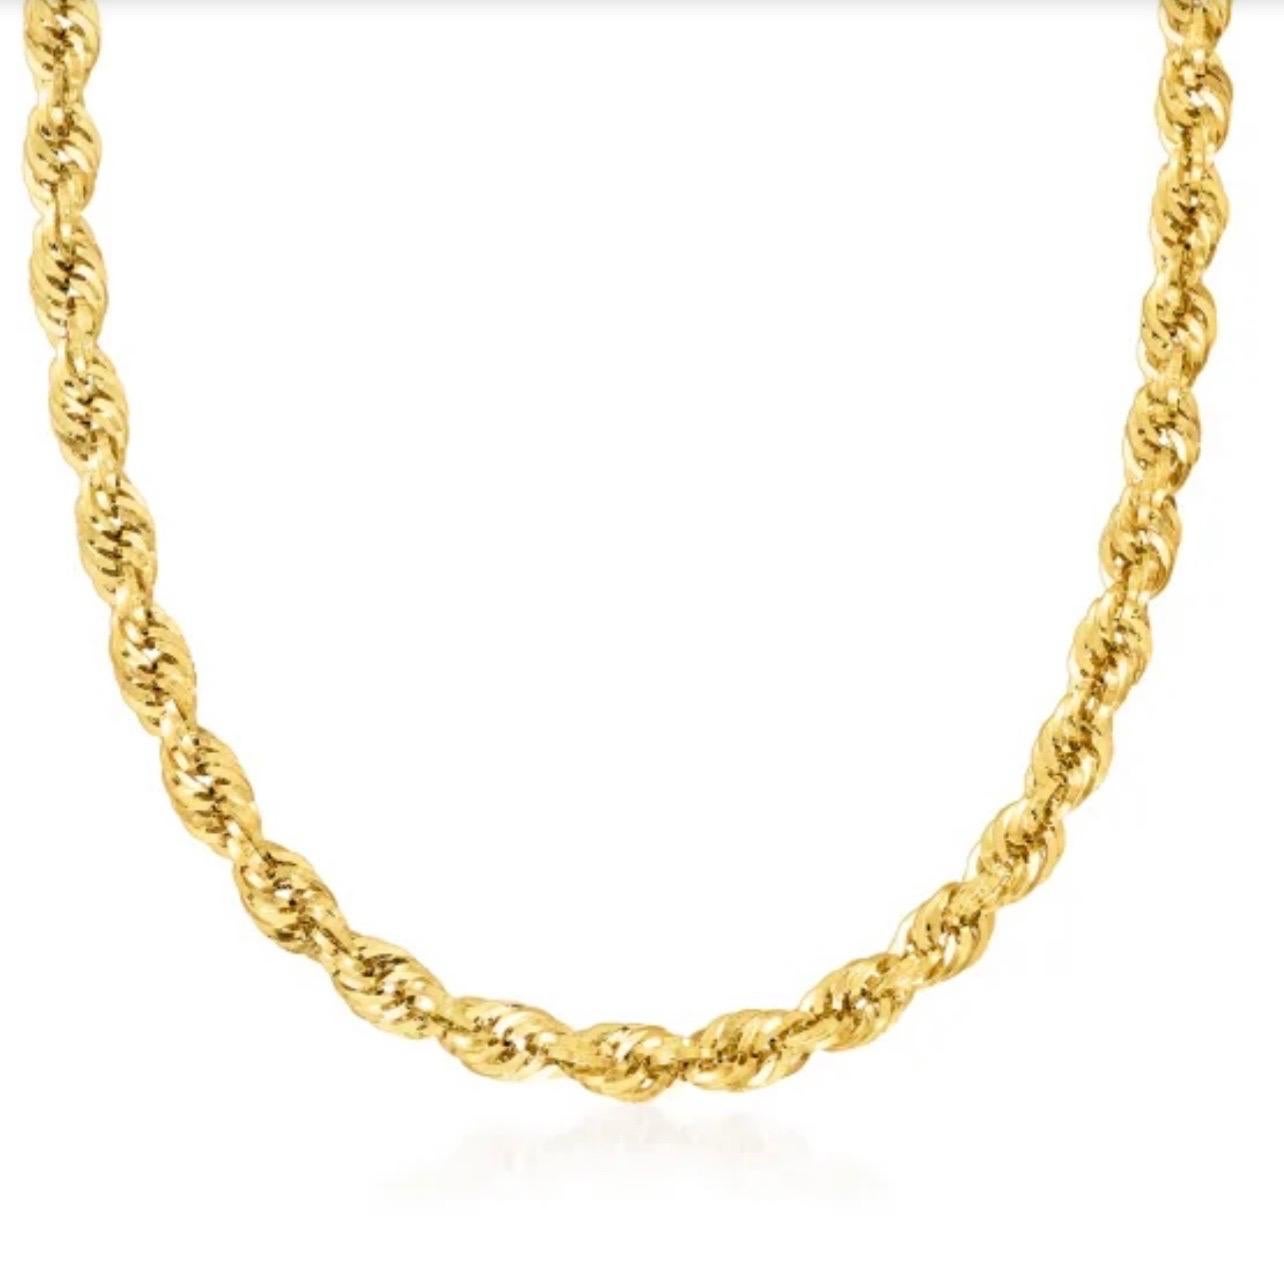 This Vintage 14 Karat Yellow Gold Rope Chain Necklace is a beautiful piece of jewelry. The necklace is 26 inches long and 3.6 mm wide, making it a great statement piece. It has a weight of 20.5 grams, making it a substantial piece that will stand